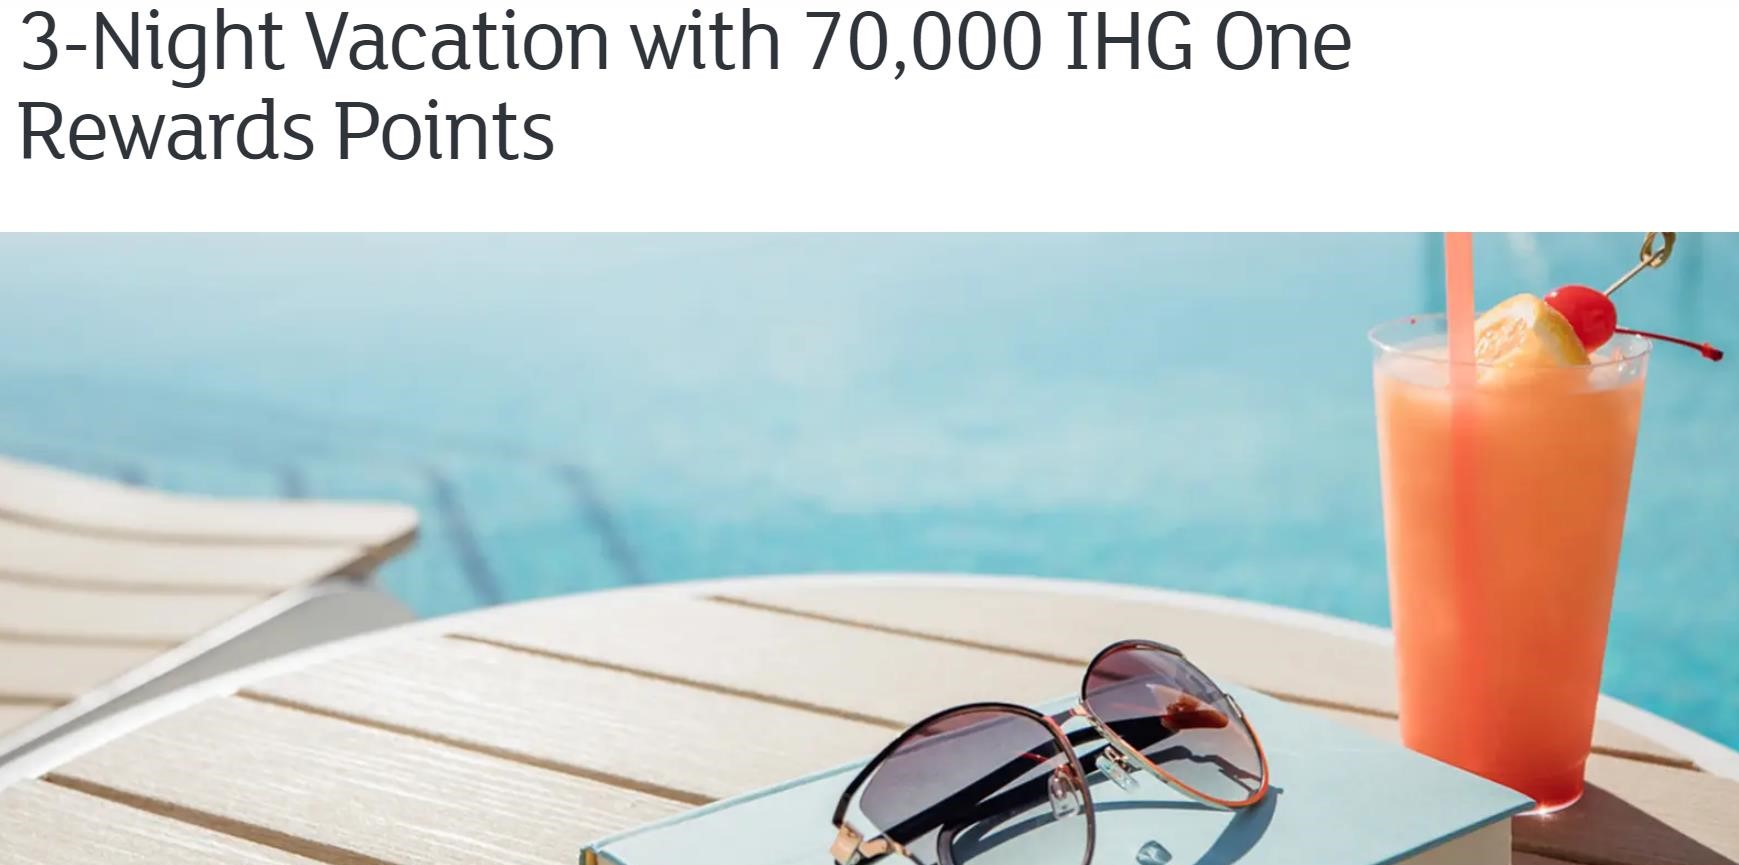 sunglasses on a table by a pool